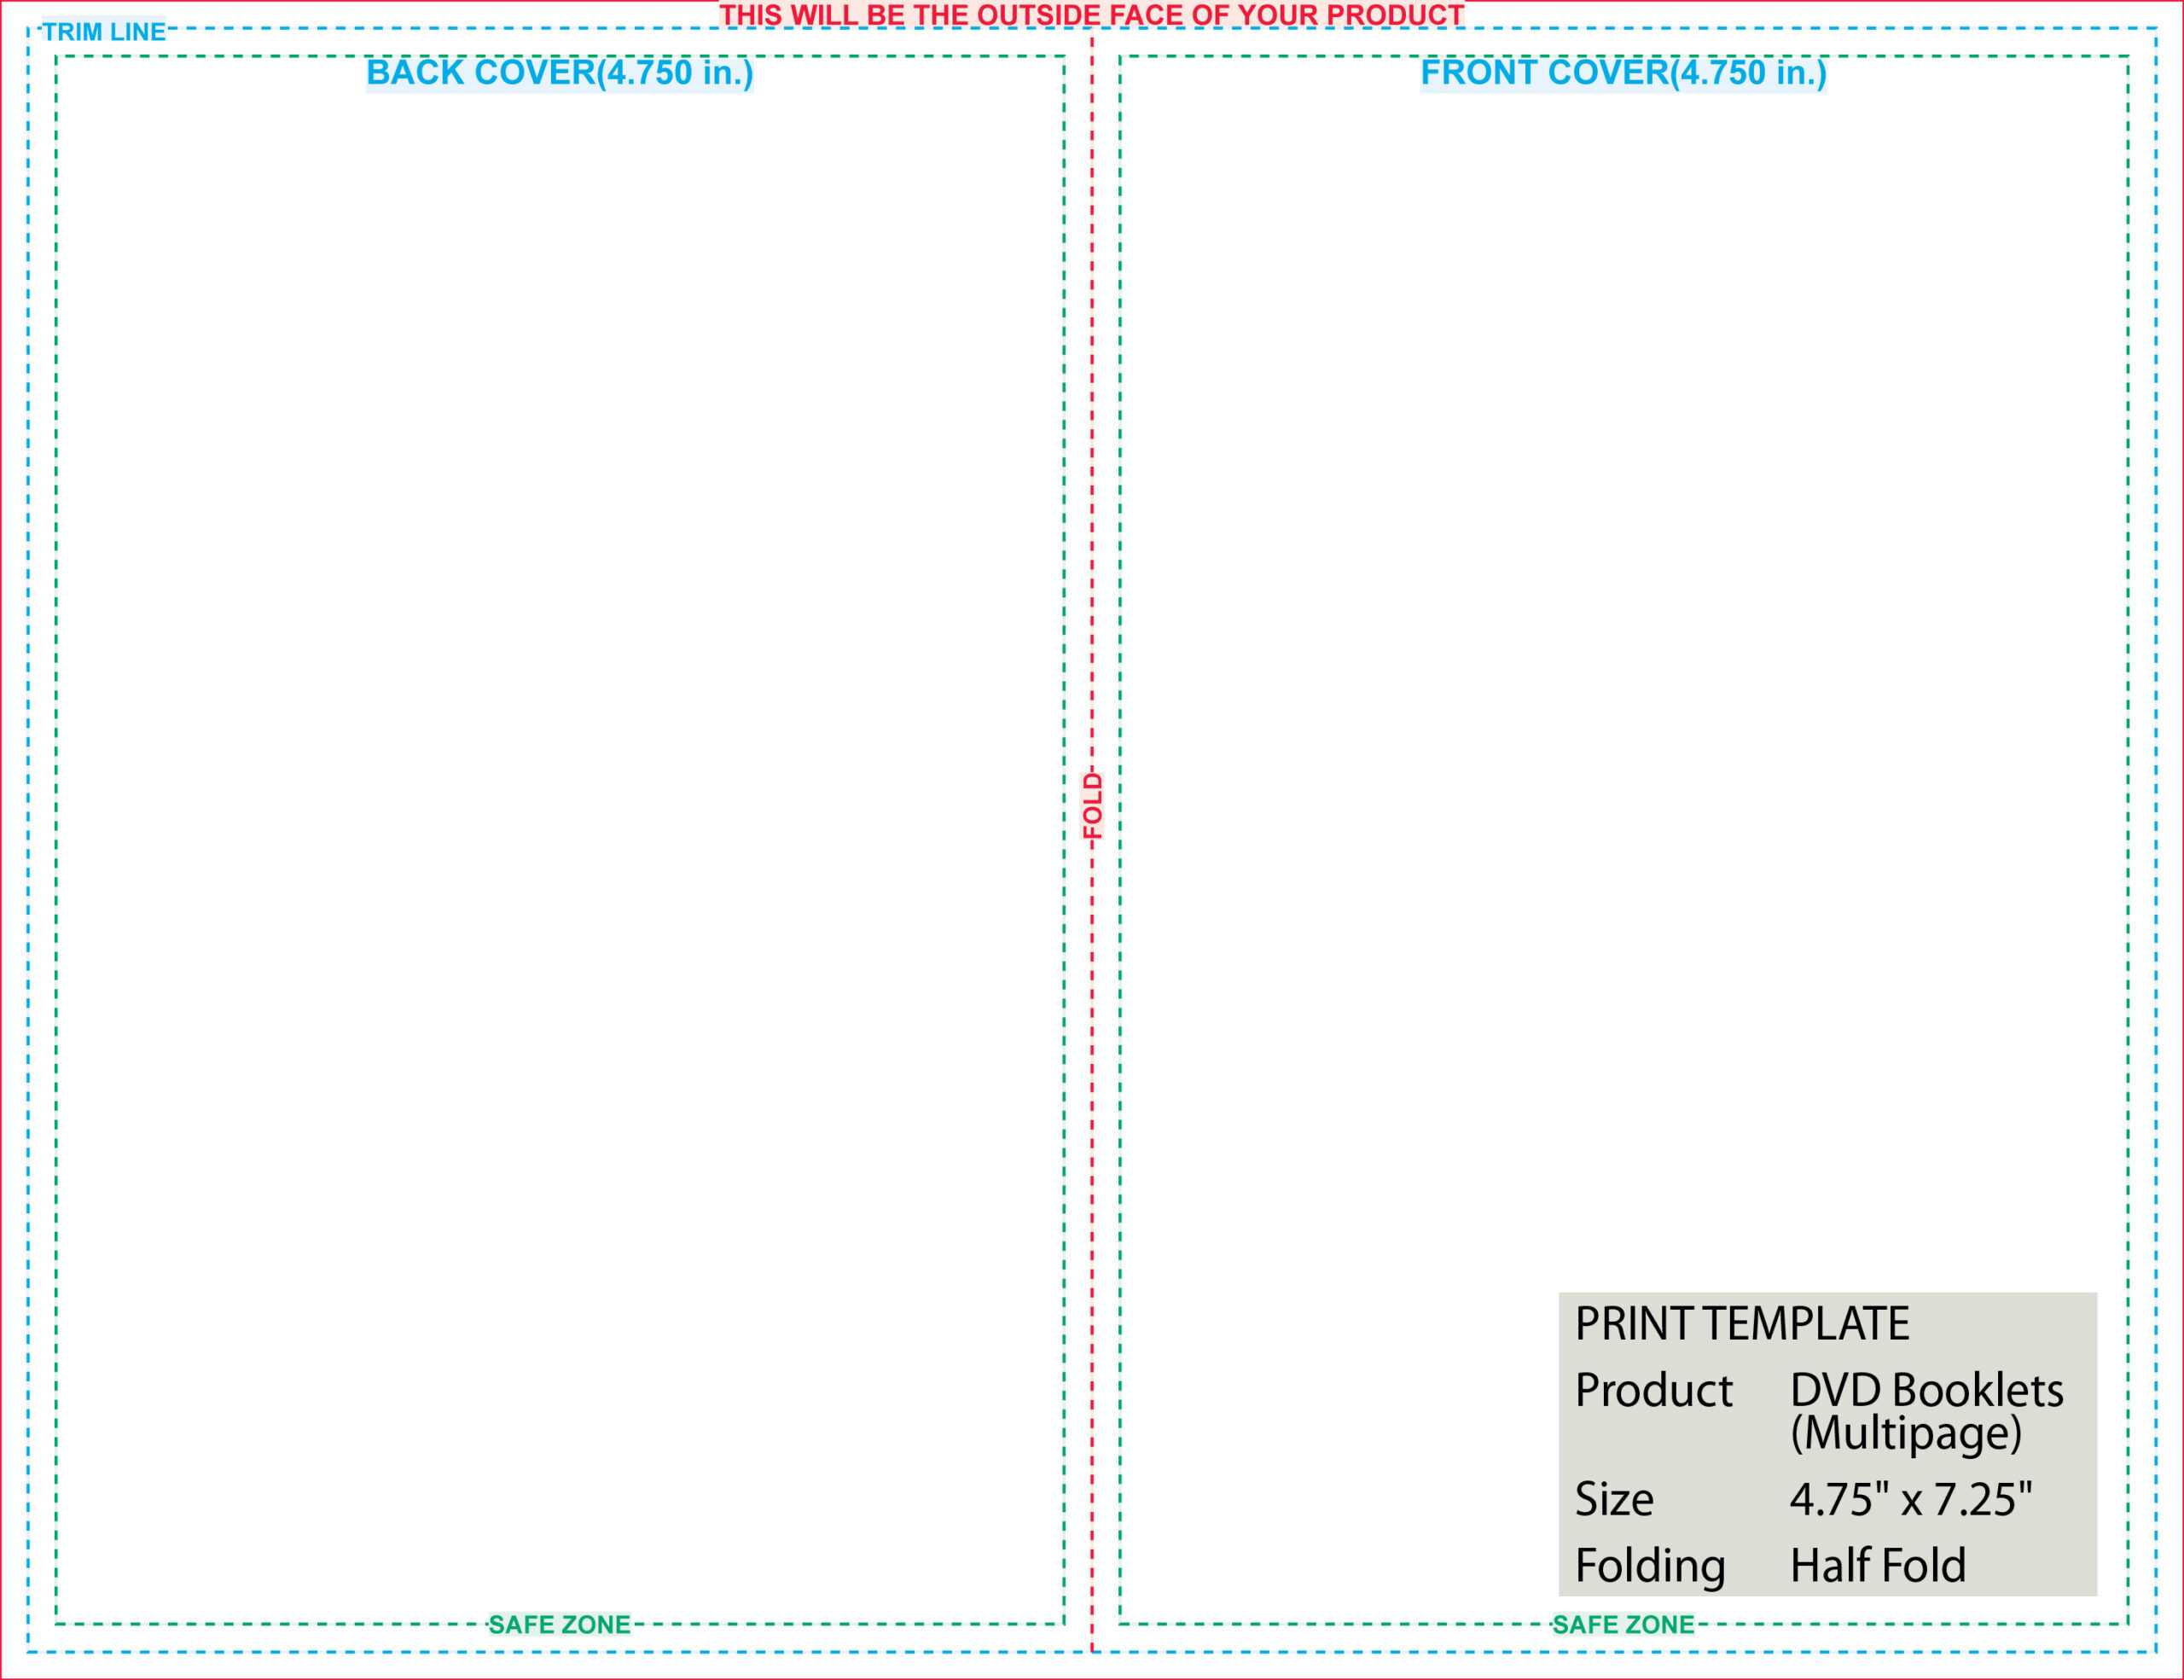 007 Template Ideas 75X7 25 Multipage Dvd Booklets Quarter Throughout Quarter Fold Card Template